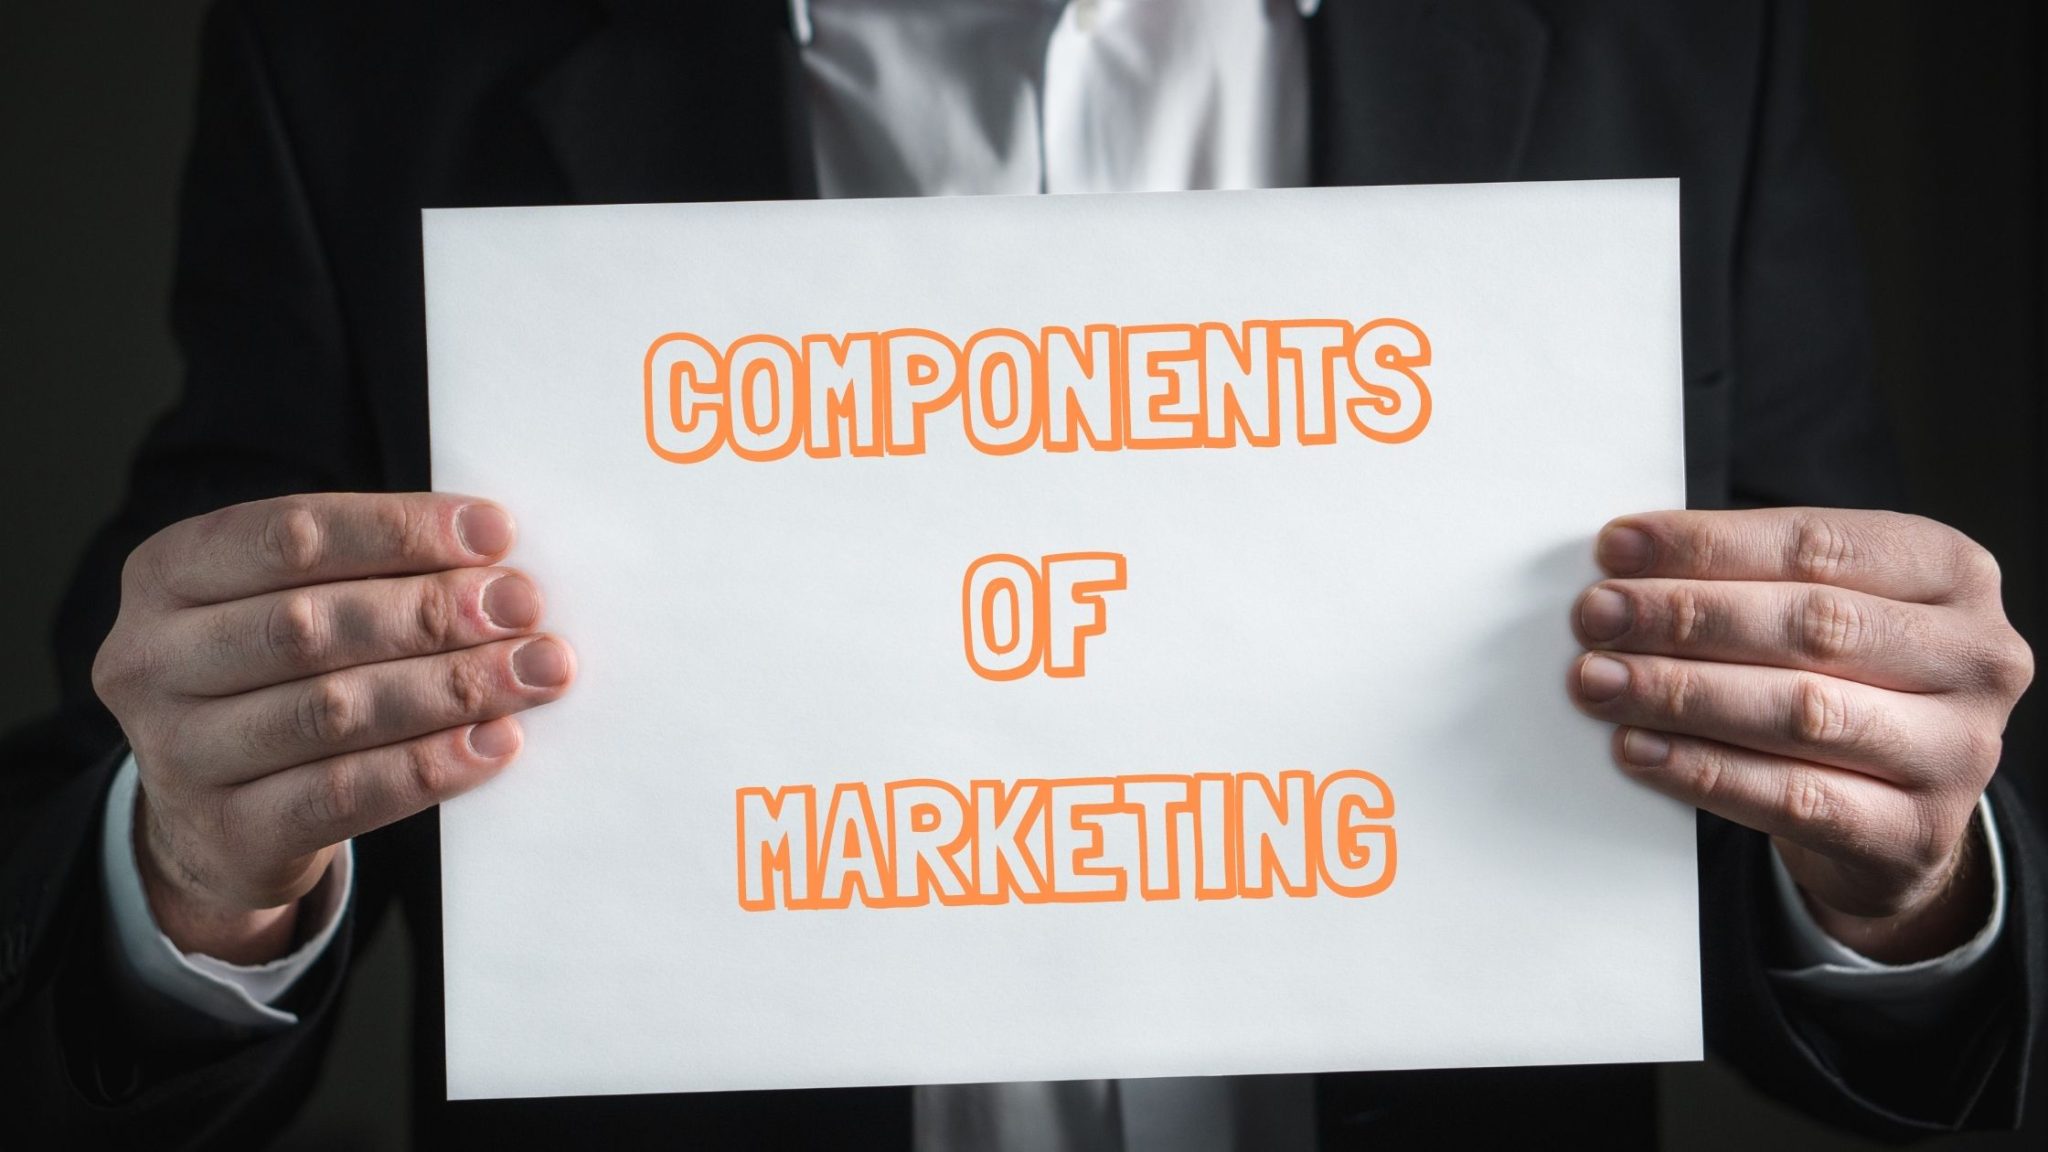 What are the Components of marketing